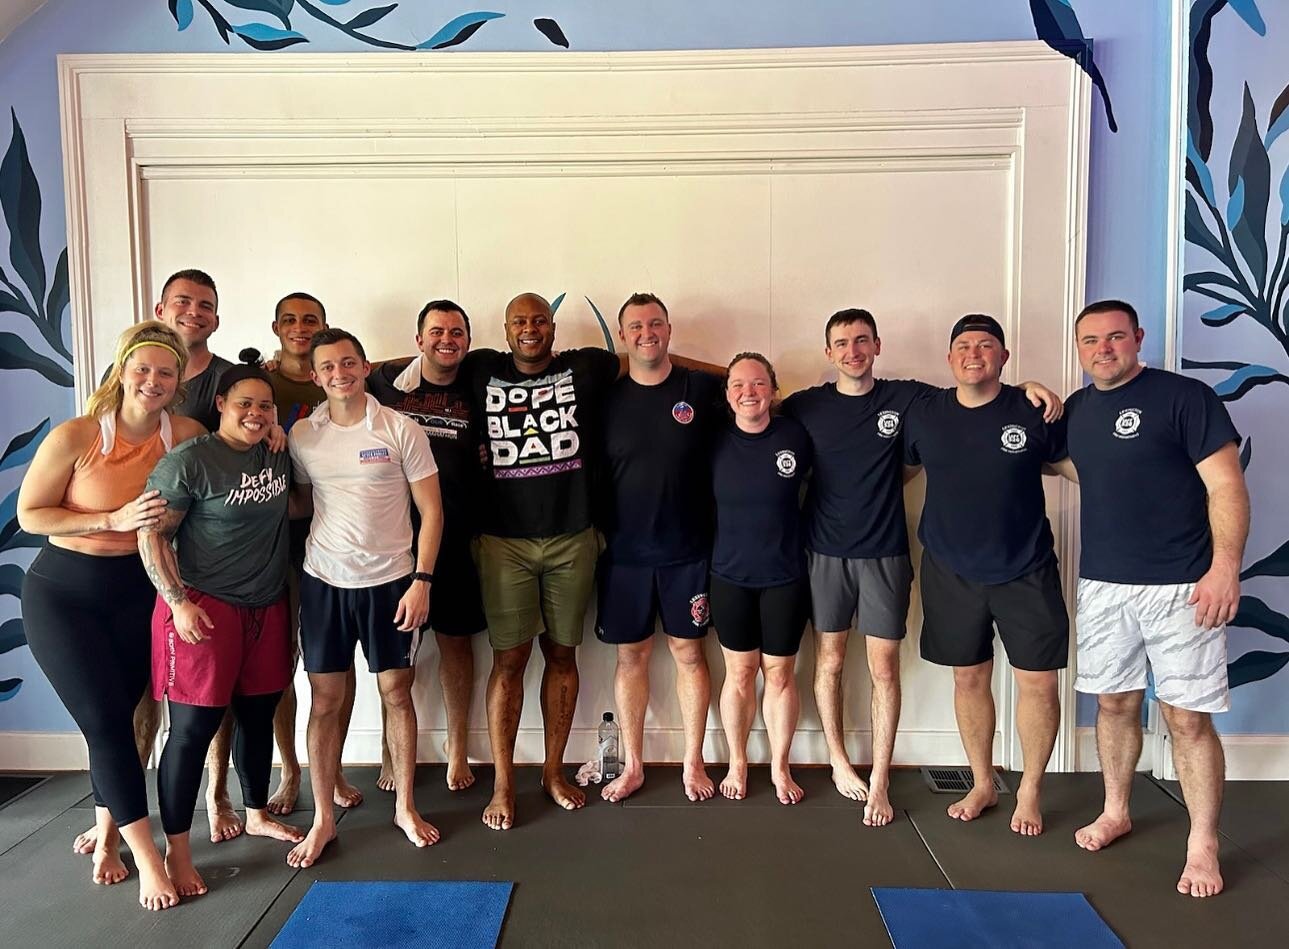 Thank you Lexington Firefighters for bringing the heat to our yoga class! 
We look forward to seeing you soon!